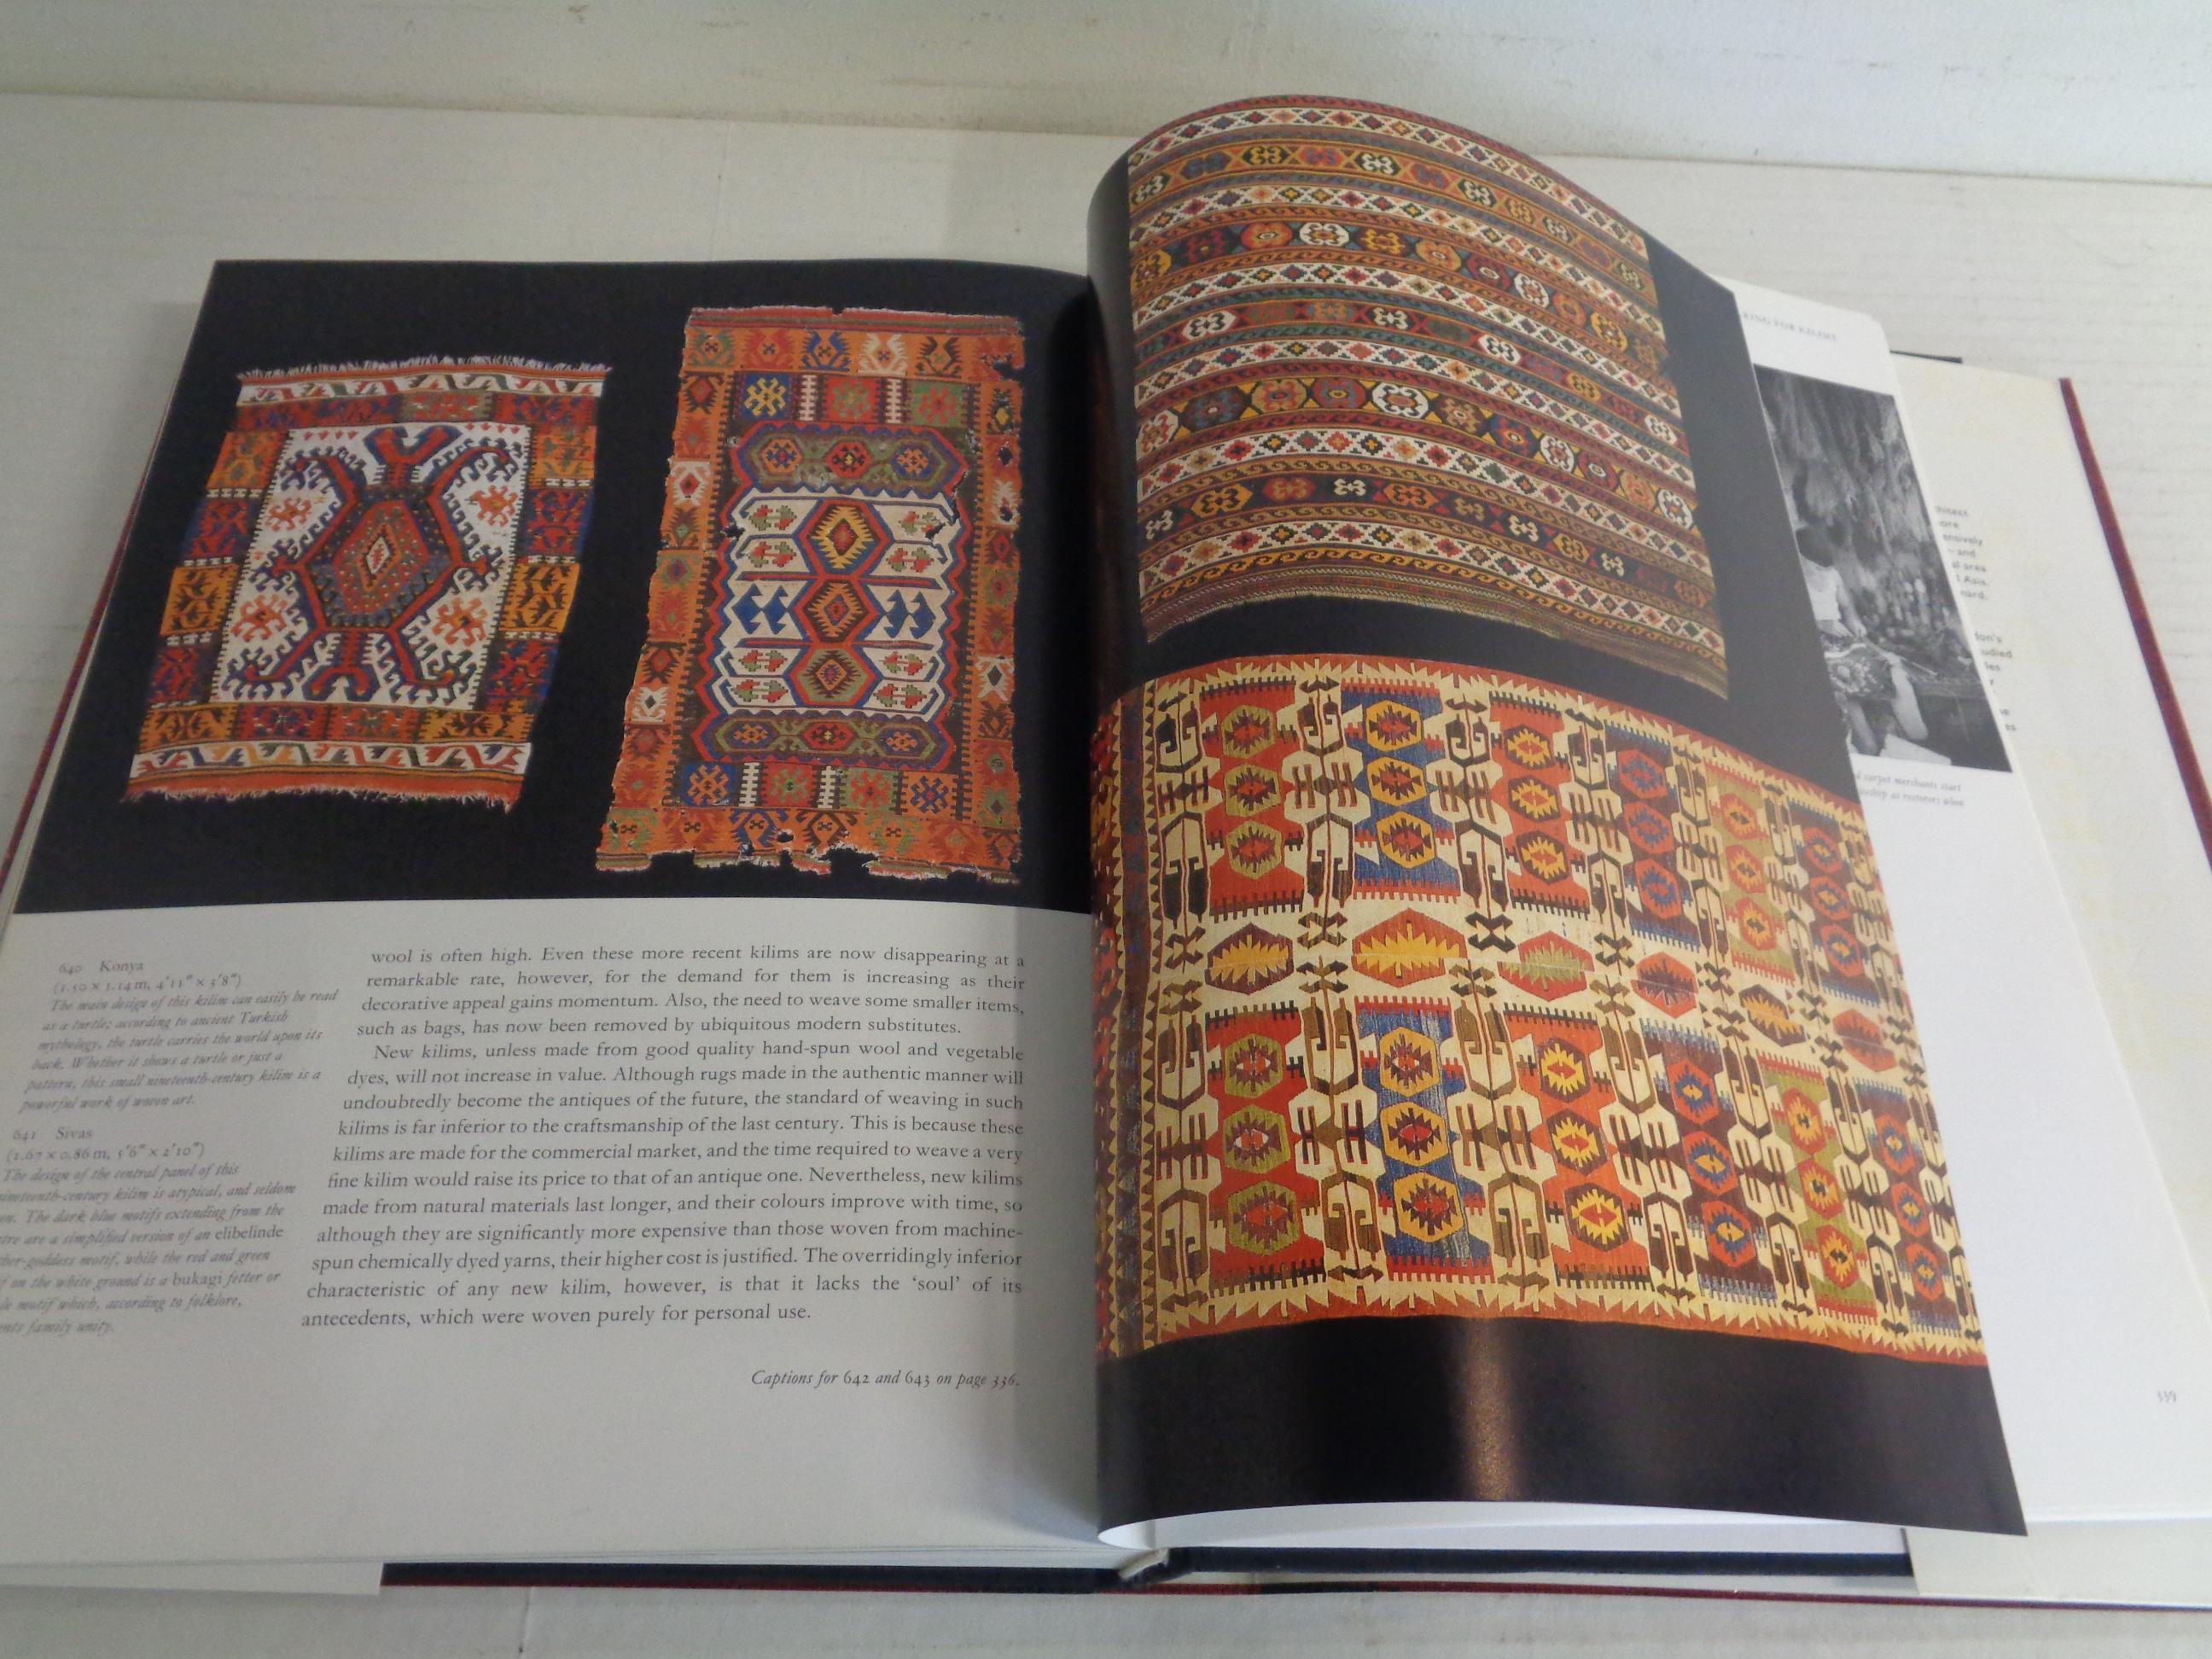 KILIM: The Complete Guide - 1993 Chronicle Books - 1st Edition For Sale 12